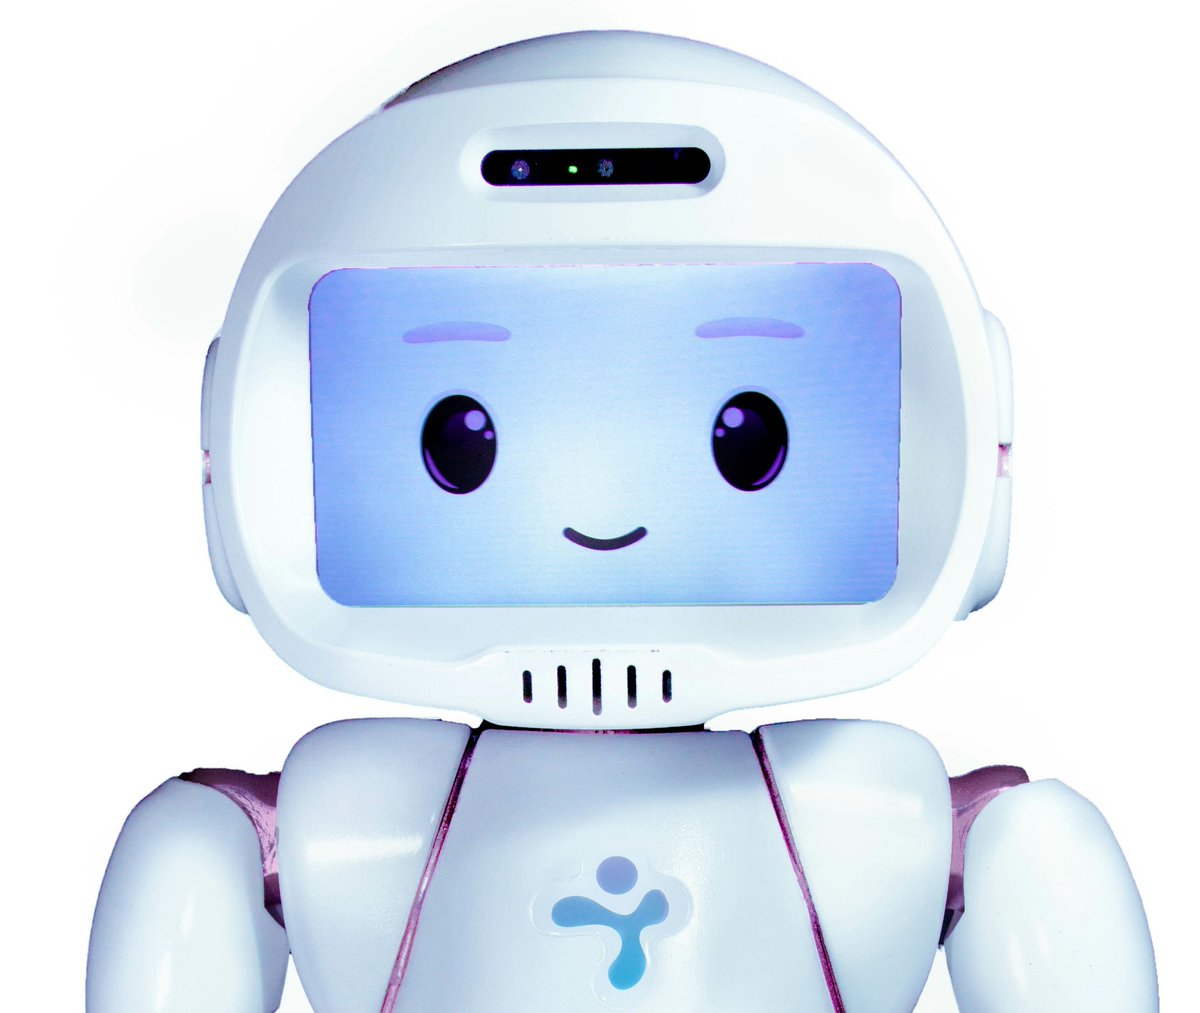 [Vivatech 2017] LuxAI: social robots to help people with autism